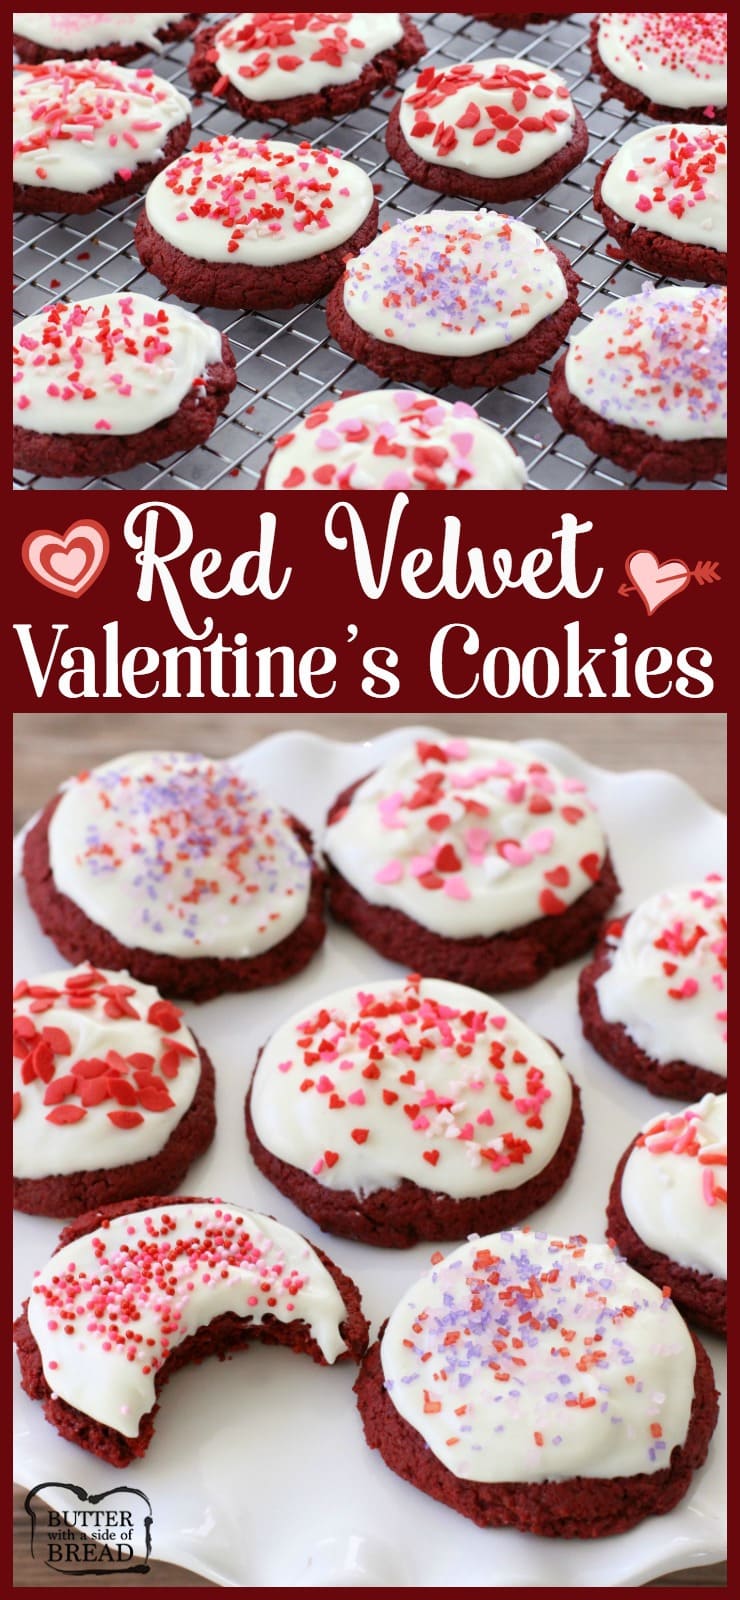 Red Velvet Valentine Cookies are rich and delicate red velvet cookies with cream cheese frosting. Unlike baking red velvet cake, these cookies are easy to make and practically foolproof!